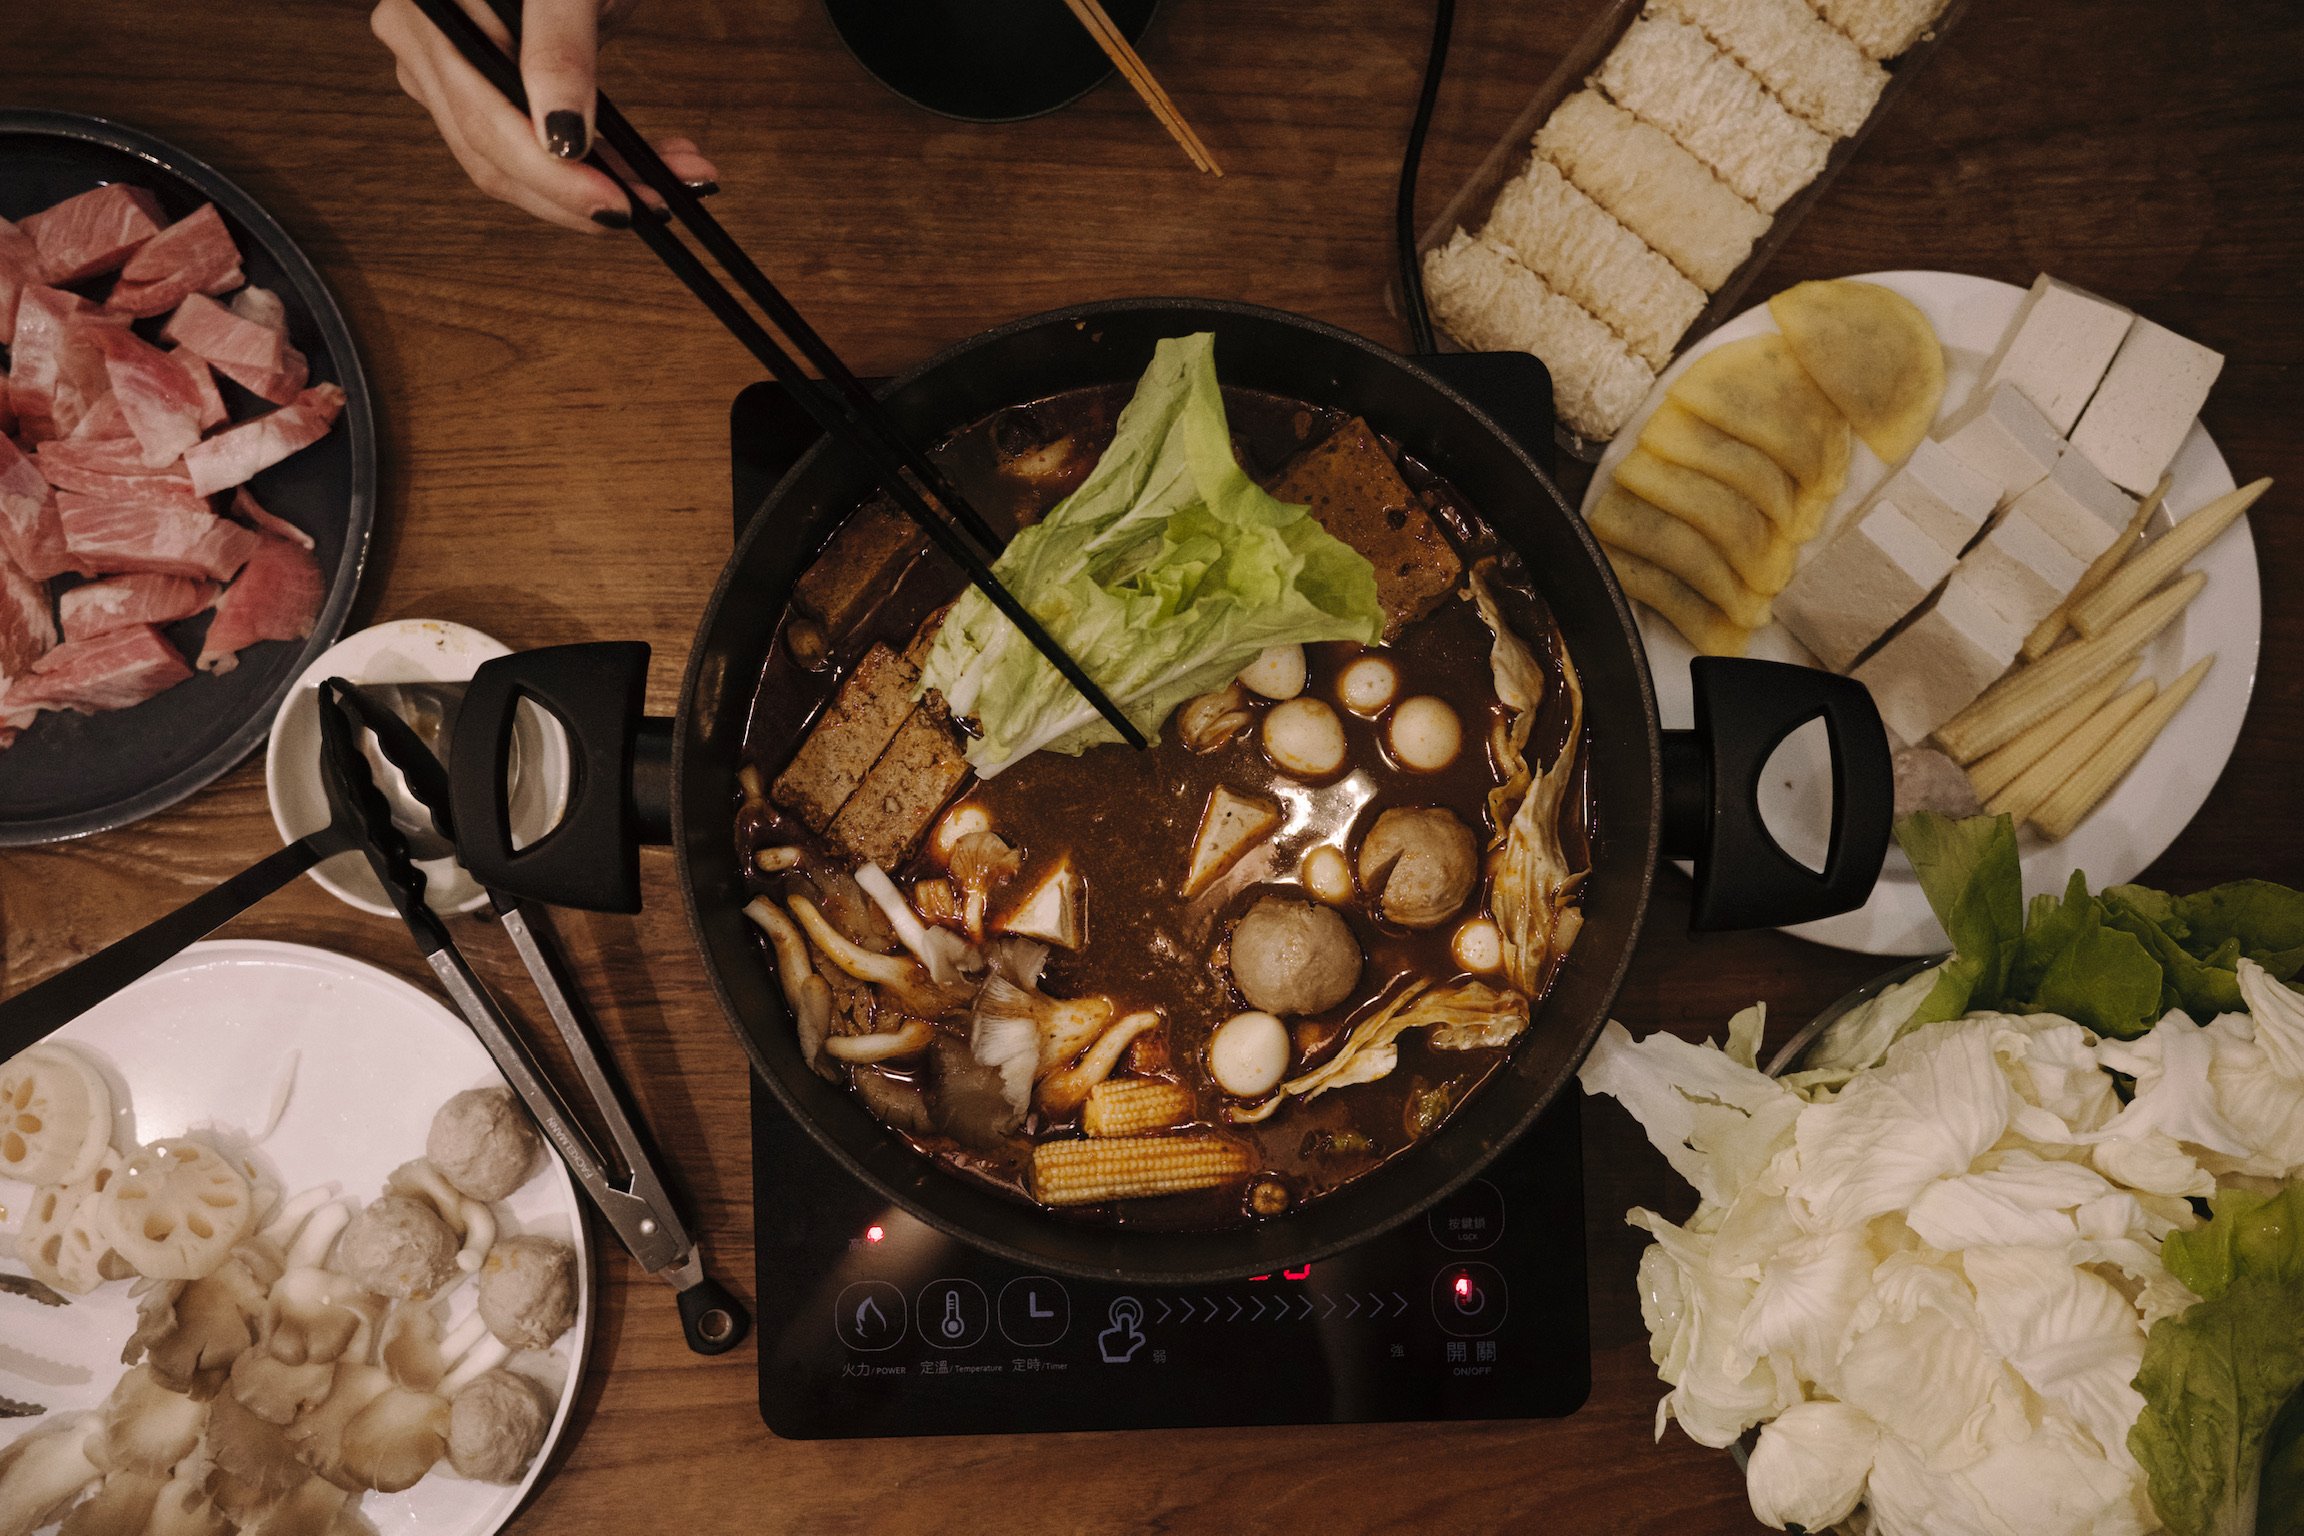 Top down shot of a hot pot with platters of vegetable and meat and one single woman’s hand holding a pair of chopsticks.